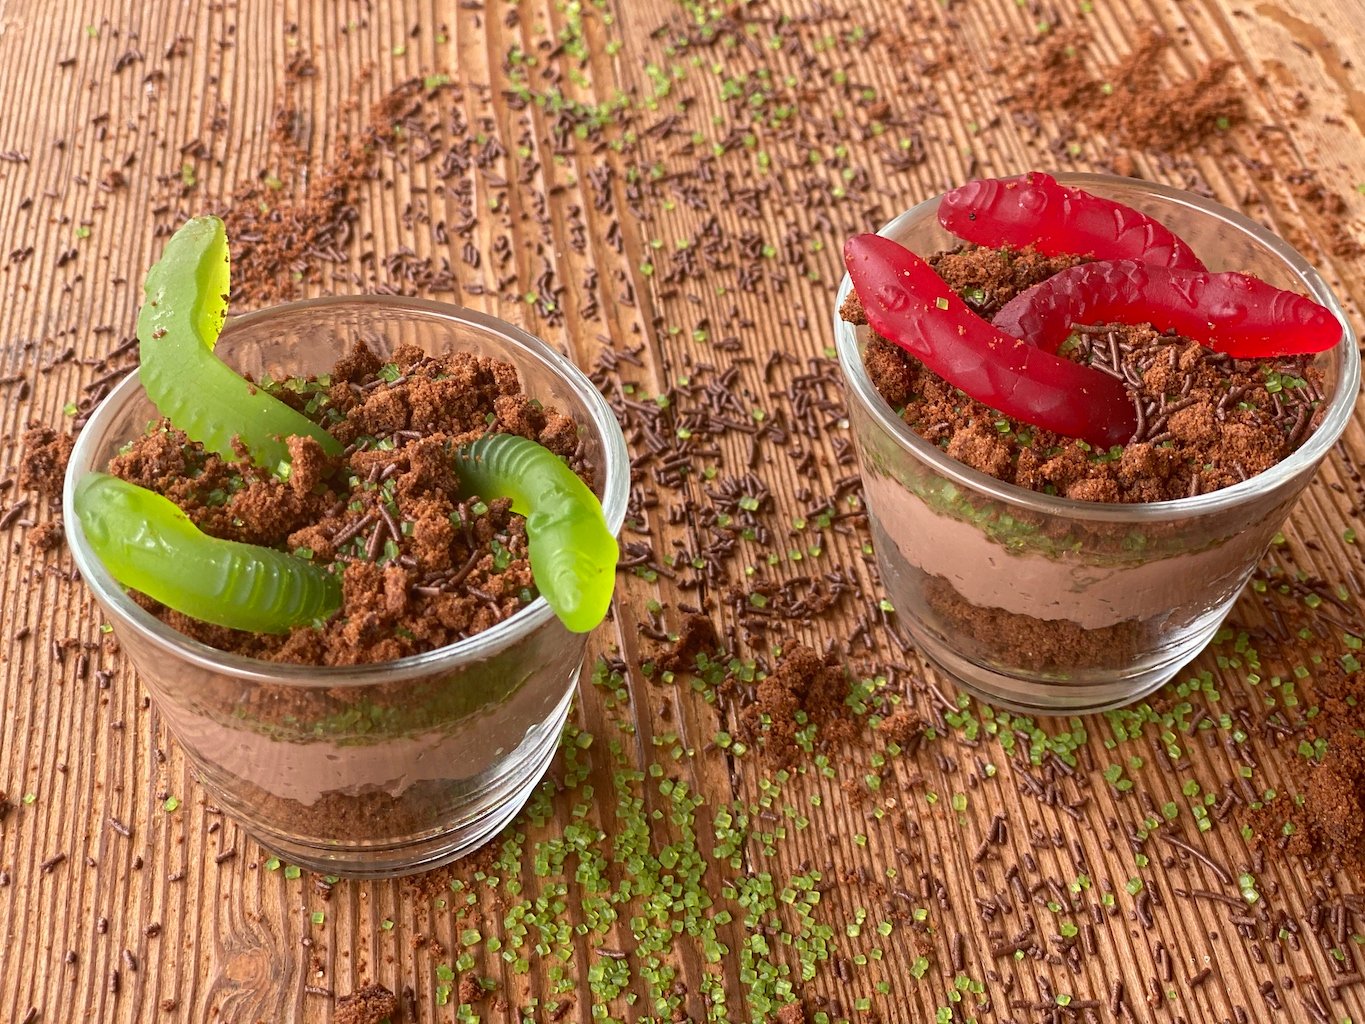 Worms in Dirt Choco Mousse